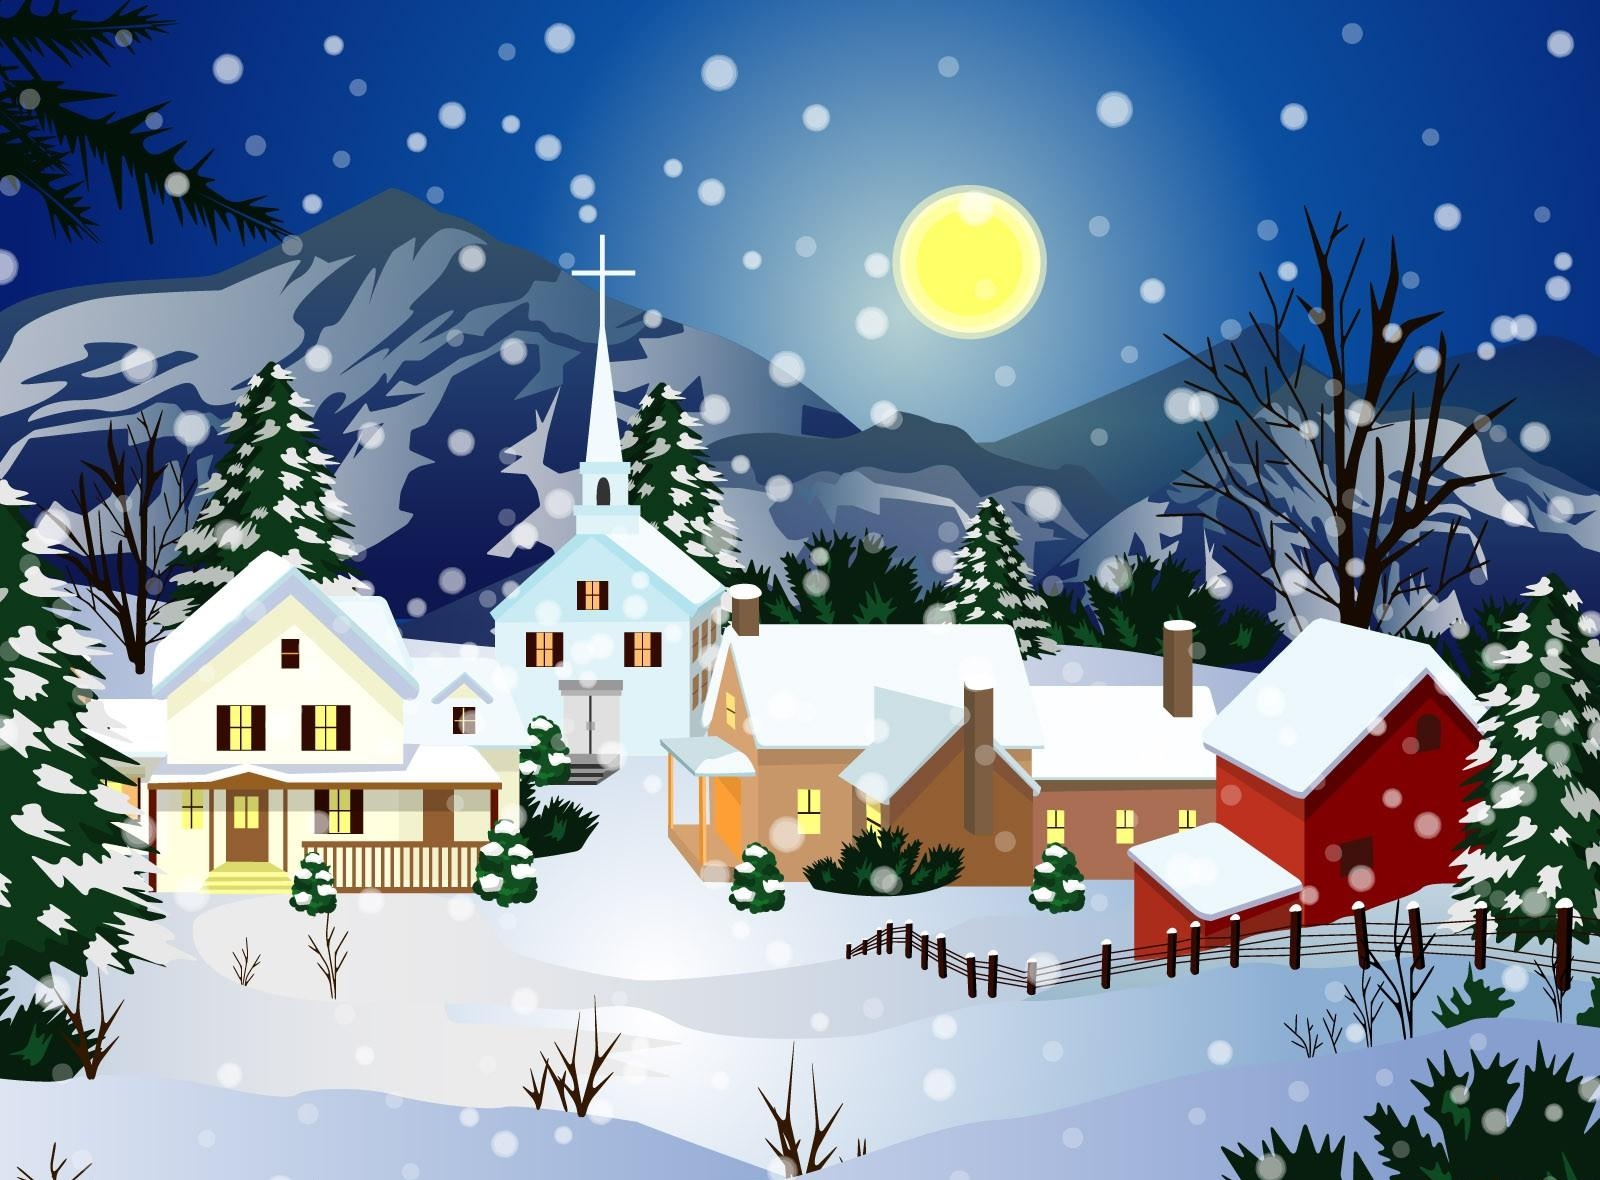 holidays, winter, houses, night, snow, full moon, church images